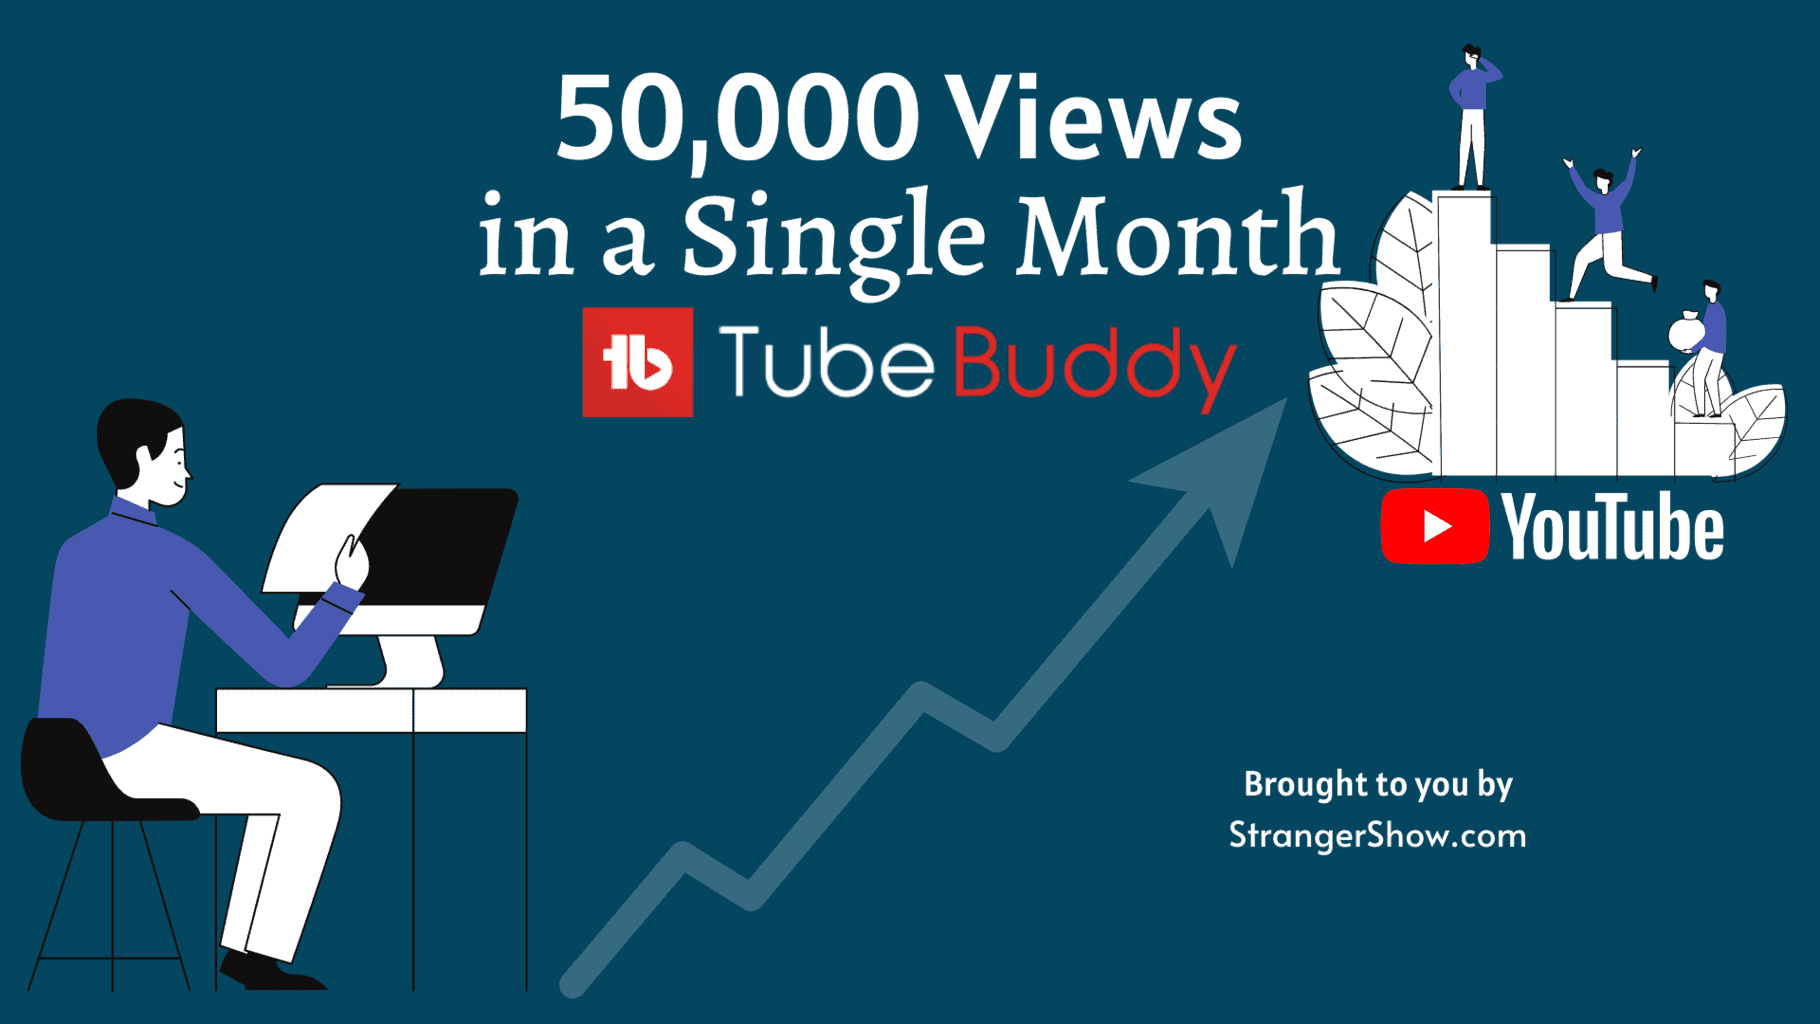 Traffic Increased by 50k Views in 30 Days: Case Study